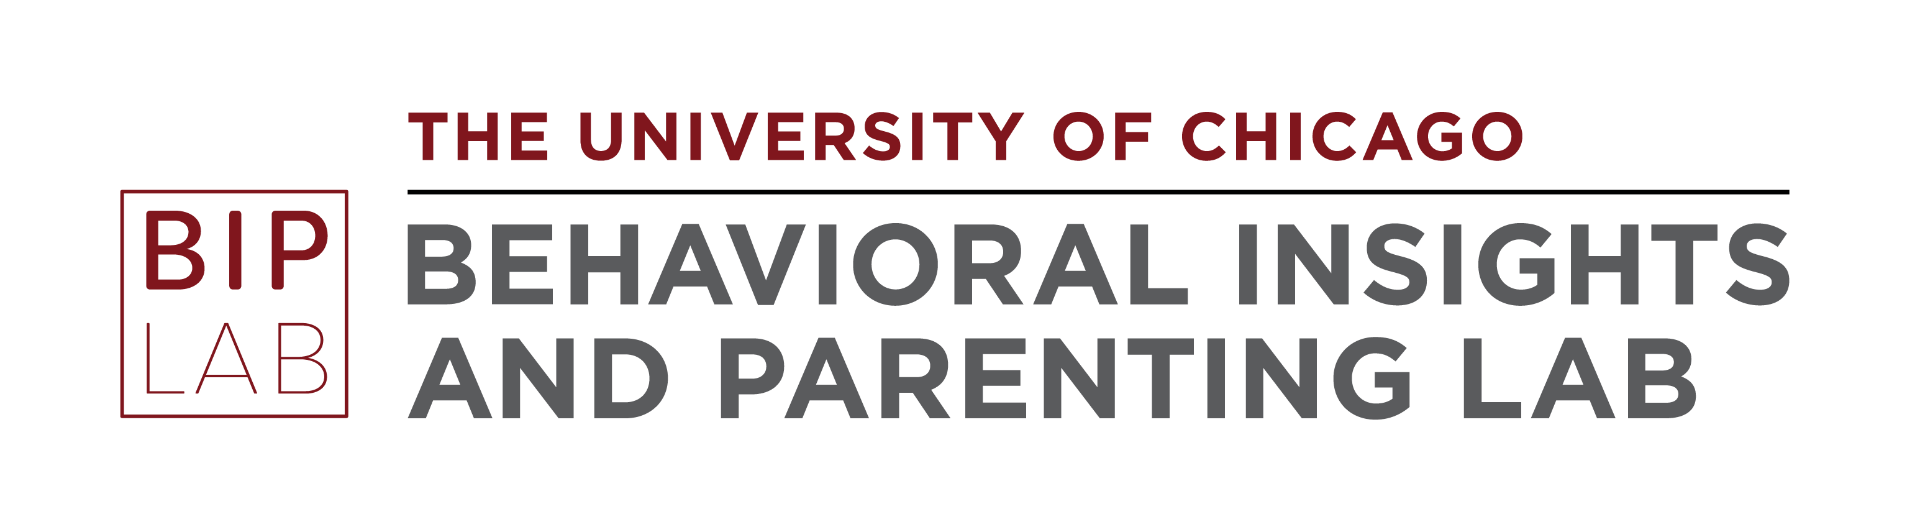 Behavioral Insights and Parenting Lab